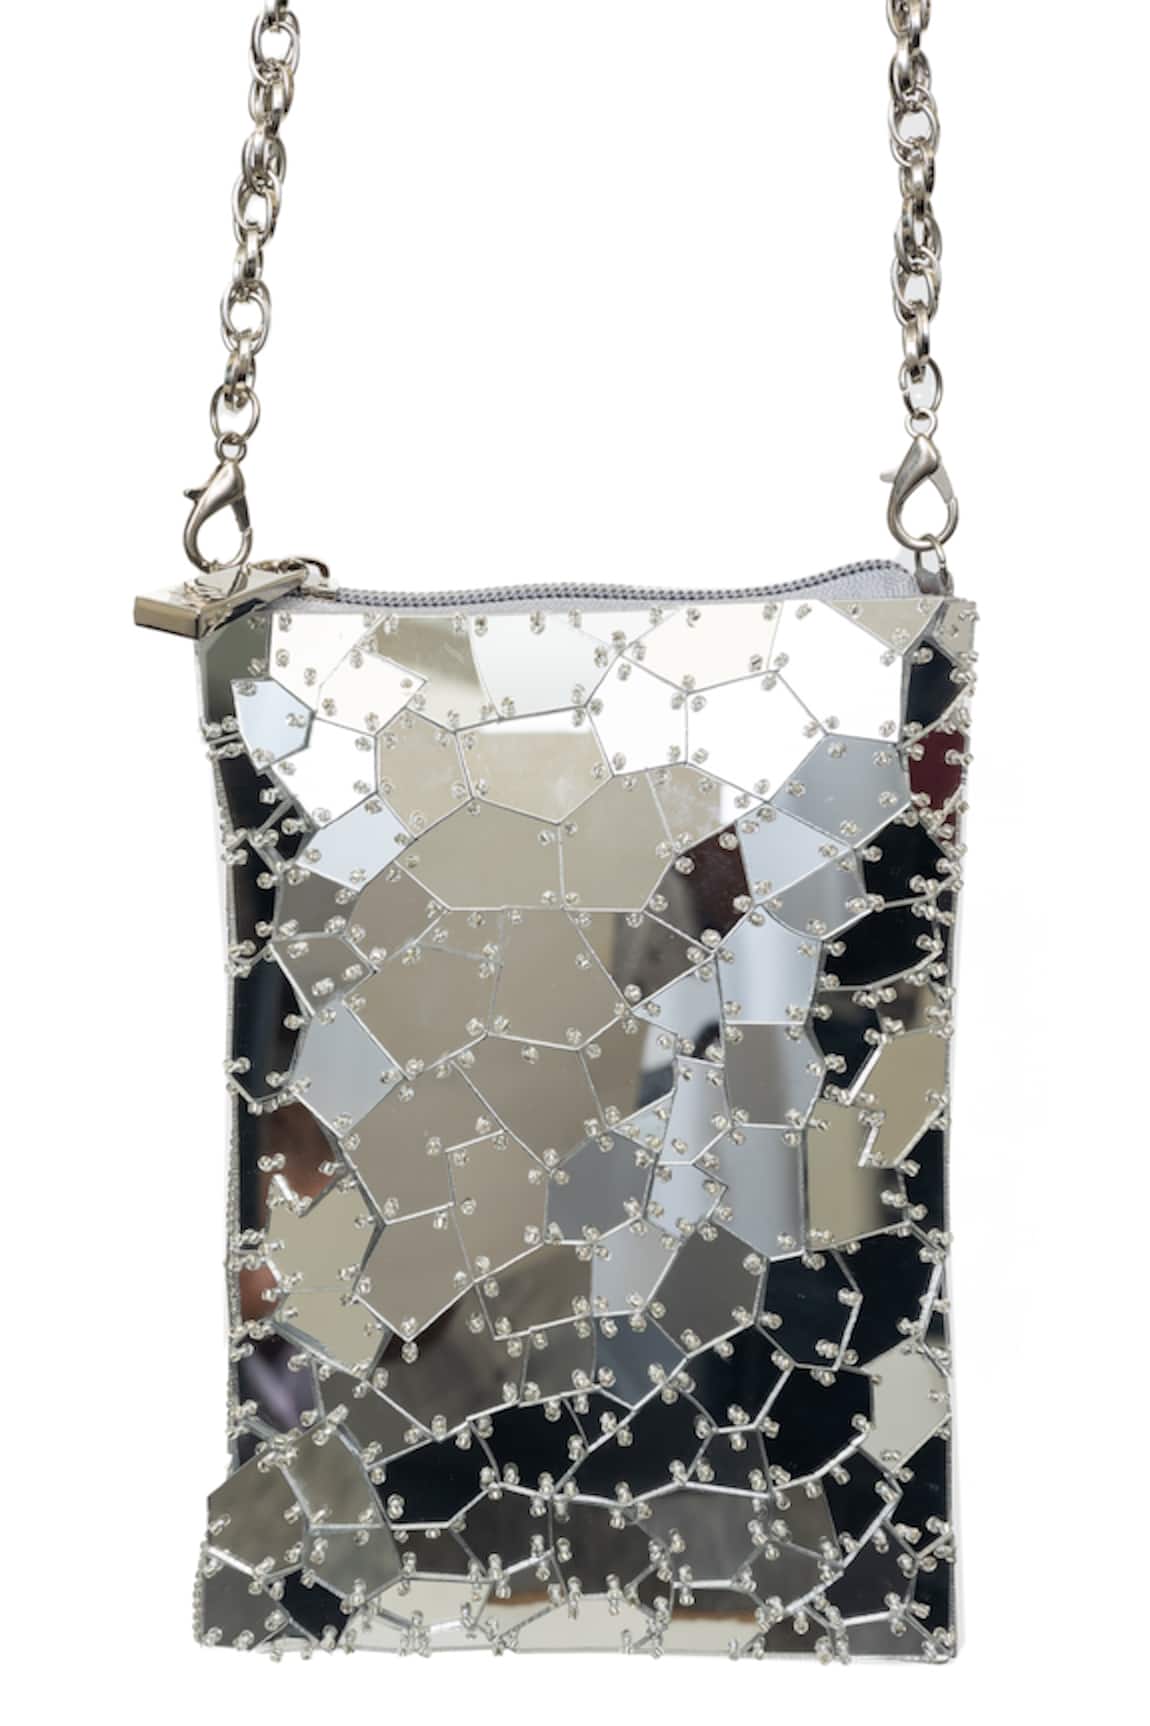 SG Collection by Sonia Gulrajani Stellar Abstract Acrylic Embellished Phone Sling Bag